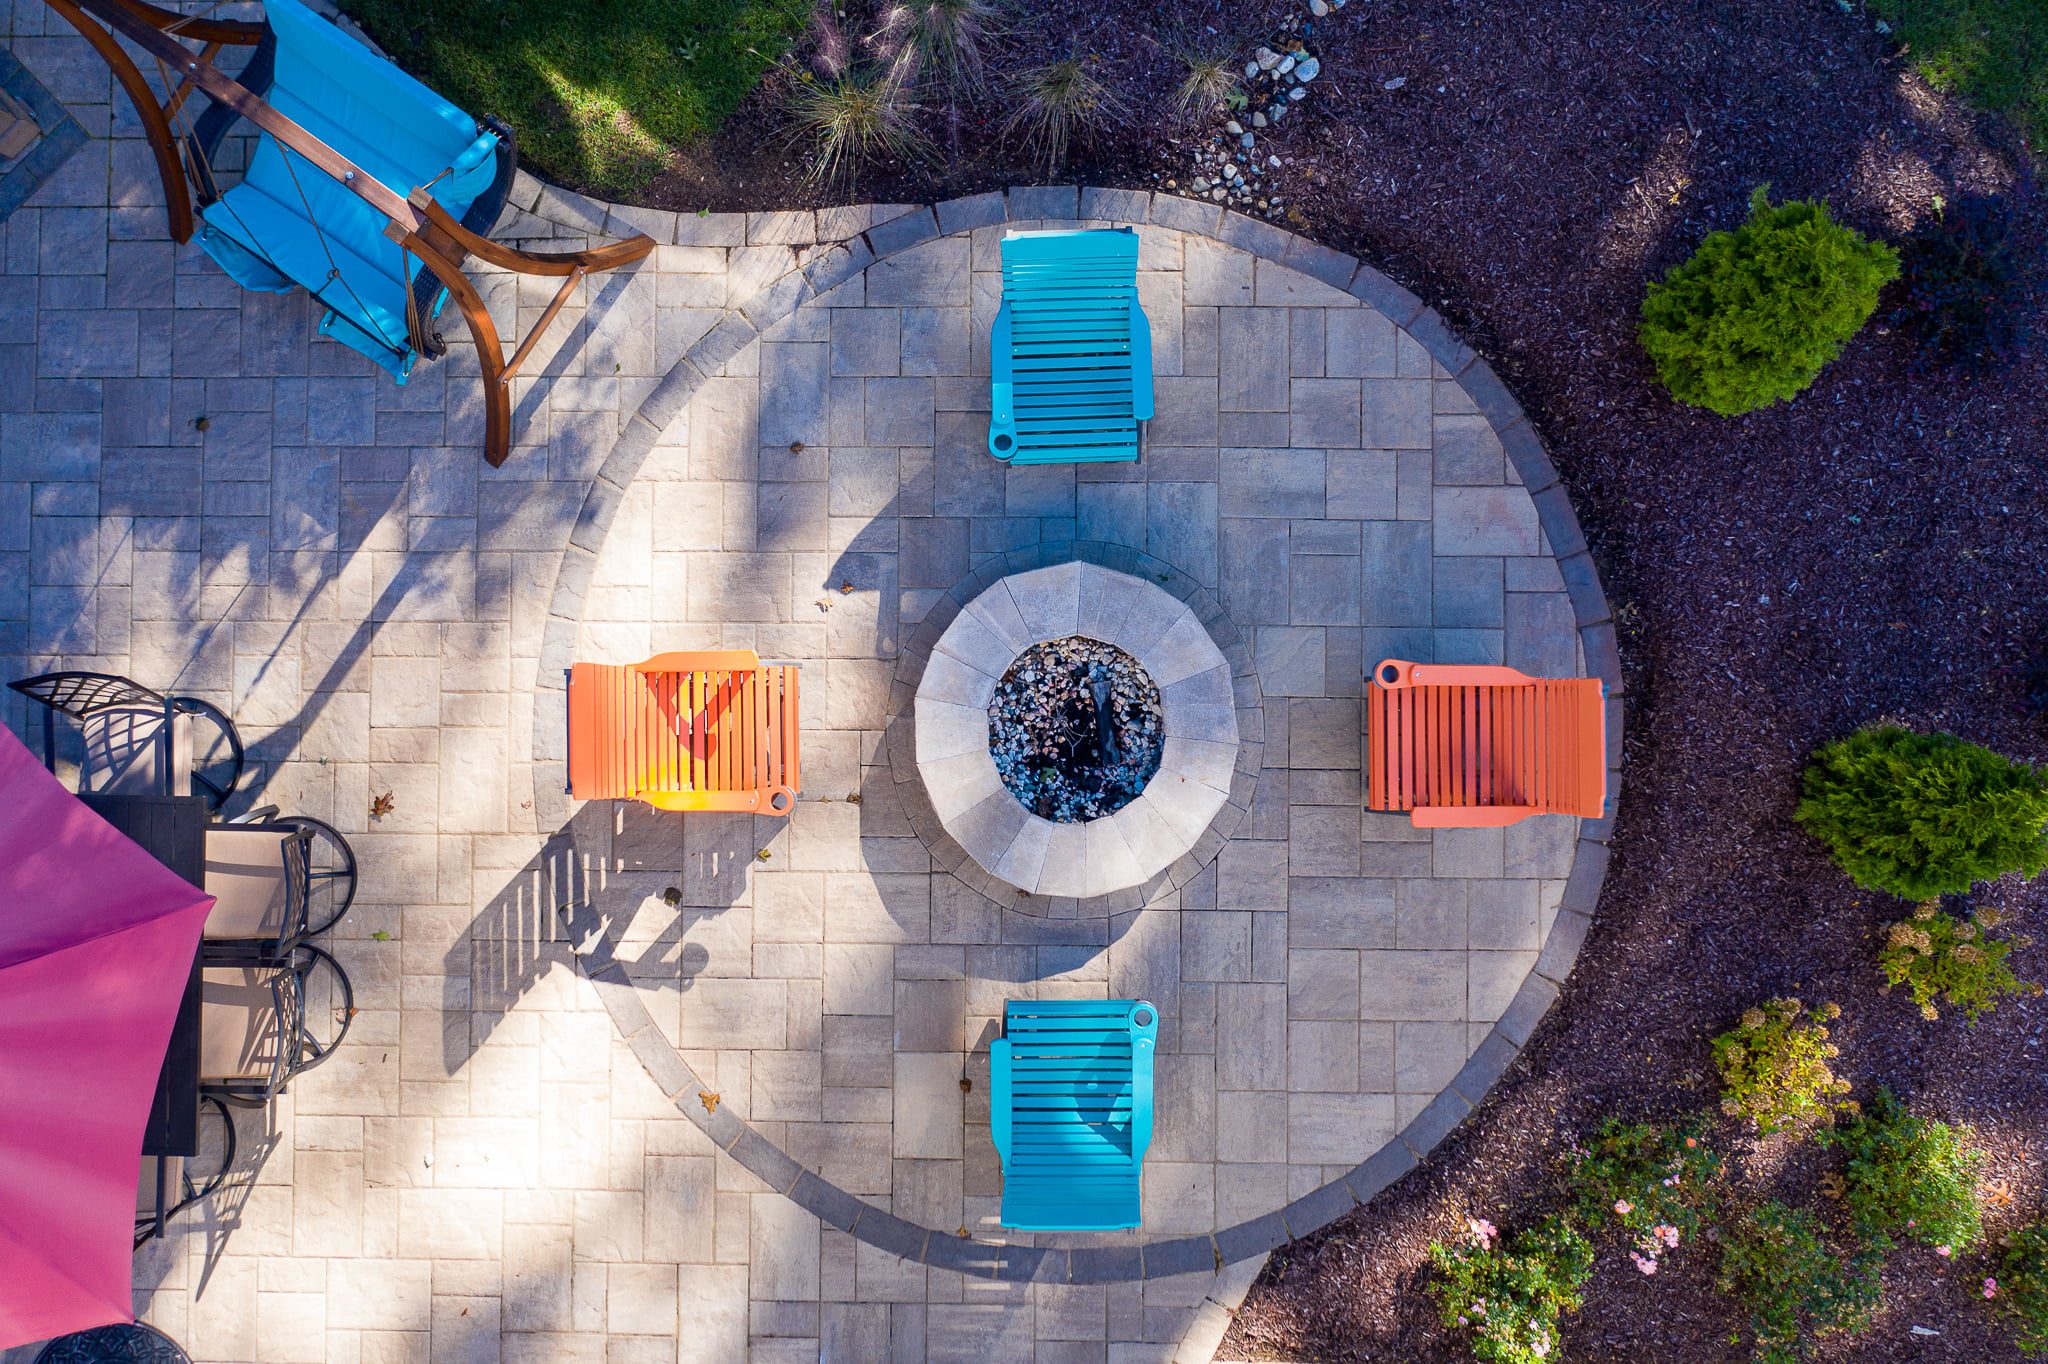 birds-eye view of paver patio and fireplace with colorful outdoor furniture